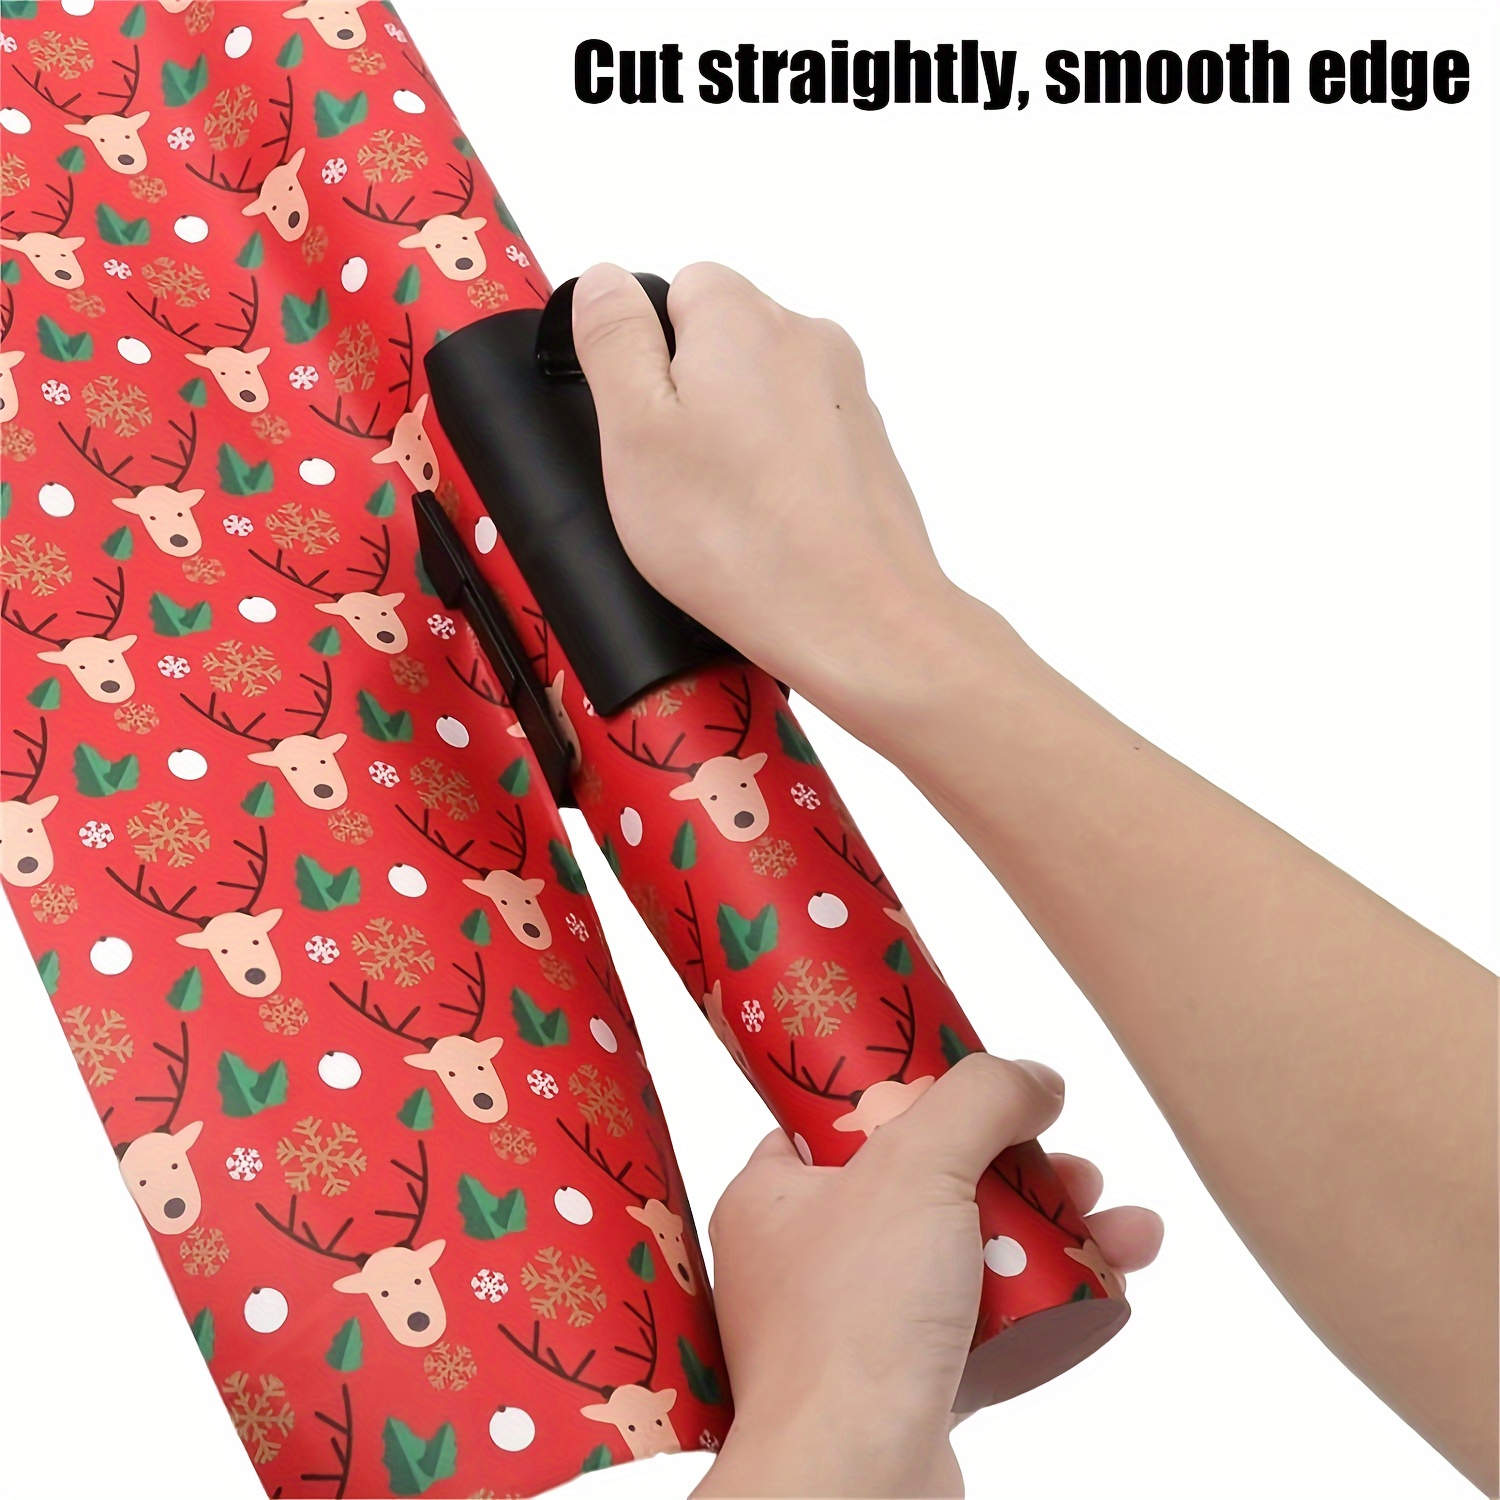 Wrapping Paper Roll Cutter 1pc Gift Wrap Cutter Wrapping Paper Cutter Tool  with Handle Push Cut Easy Sliding Birthday Gift Wrap Paper Roll Dispenser